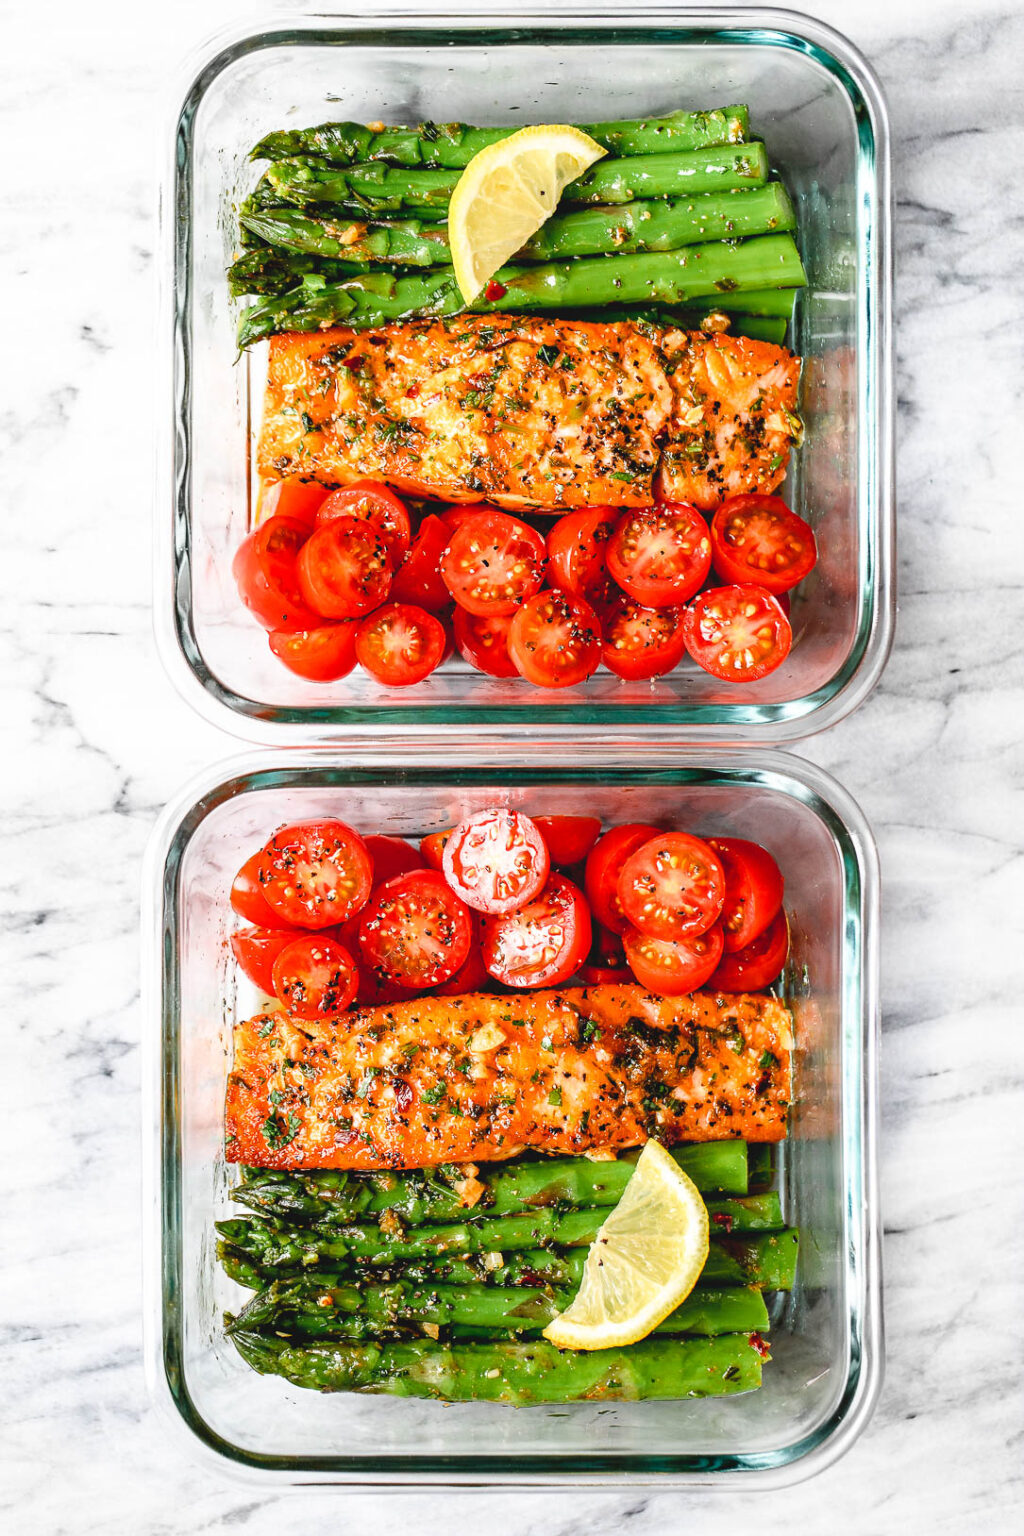 25 Best Meal Prep Ideas For Weight Loss - Gathering Dreams